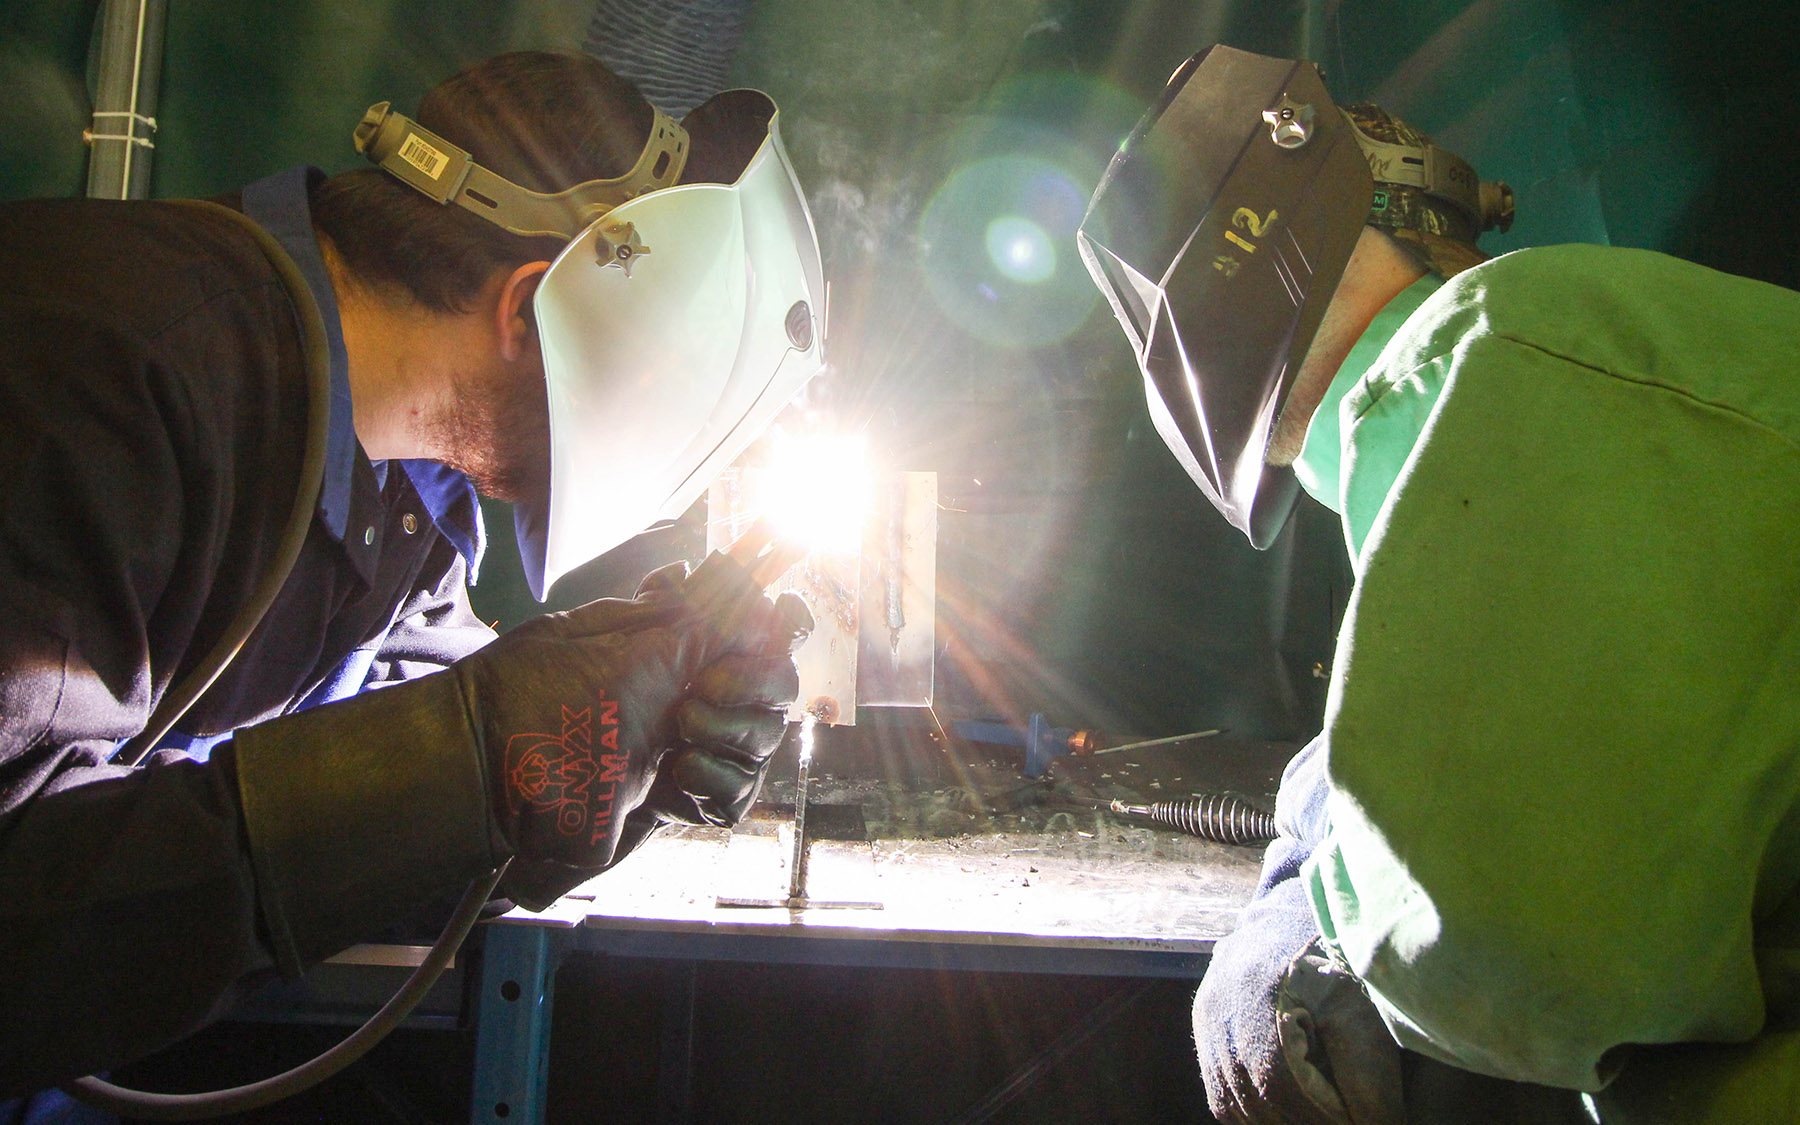 Two students welding